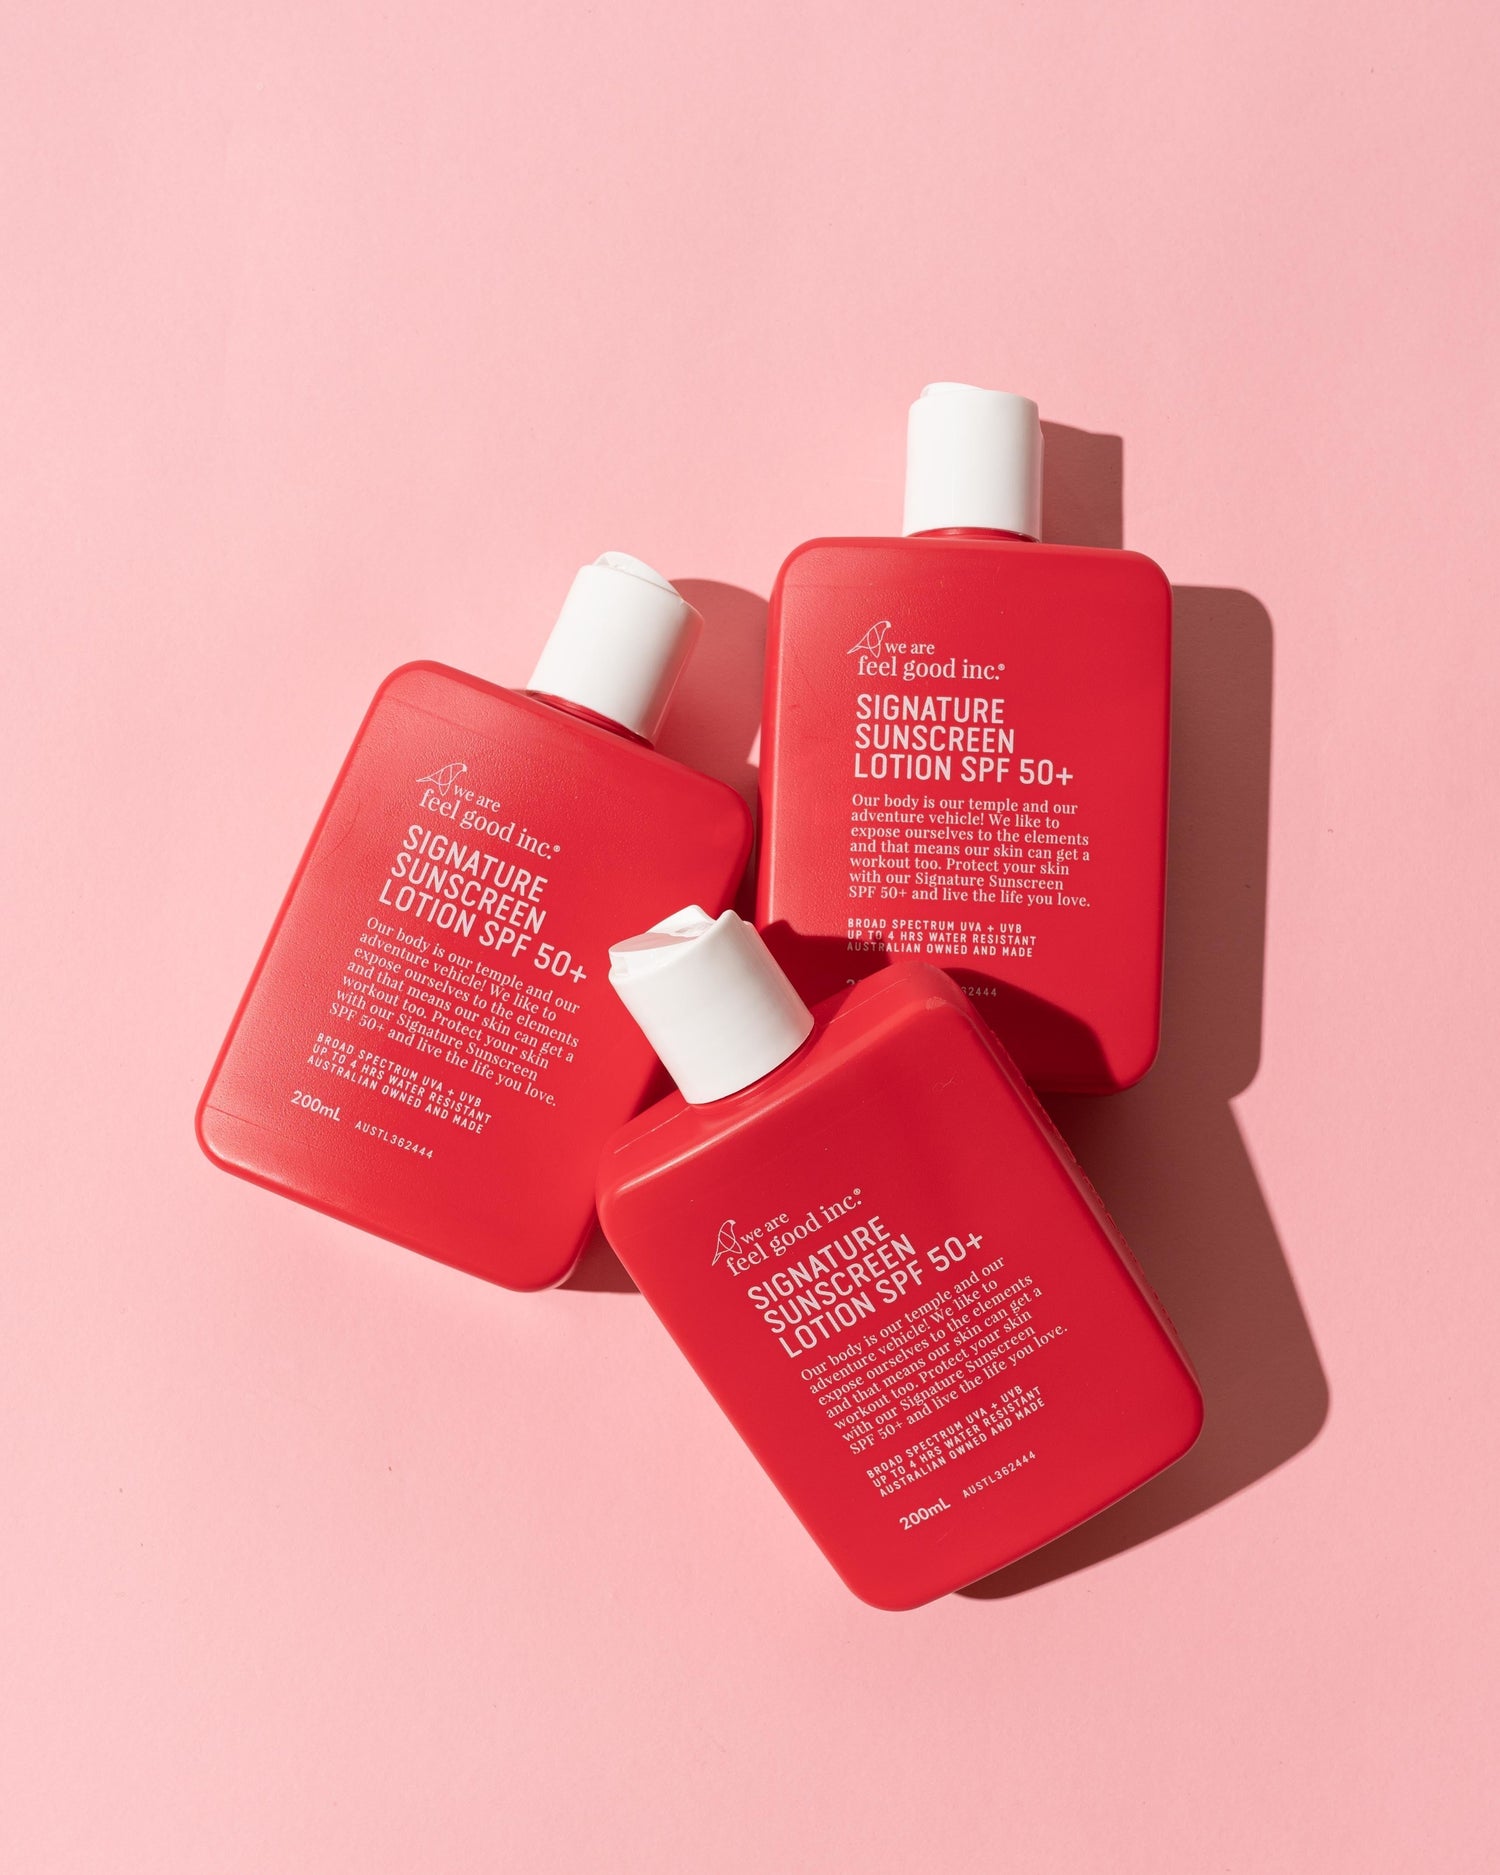 Three 200ml red bottles of We Are Feel Good Inc. Signature Sunscreen Lotion SPF 50+ are arranged diagonally